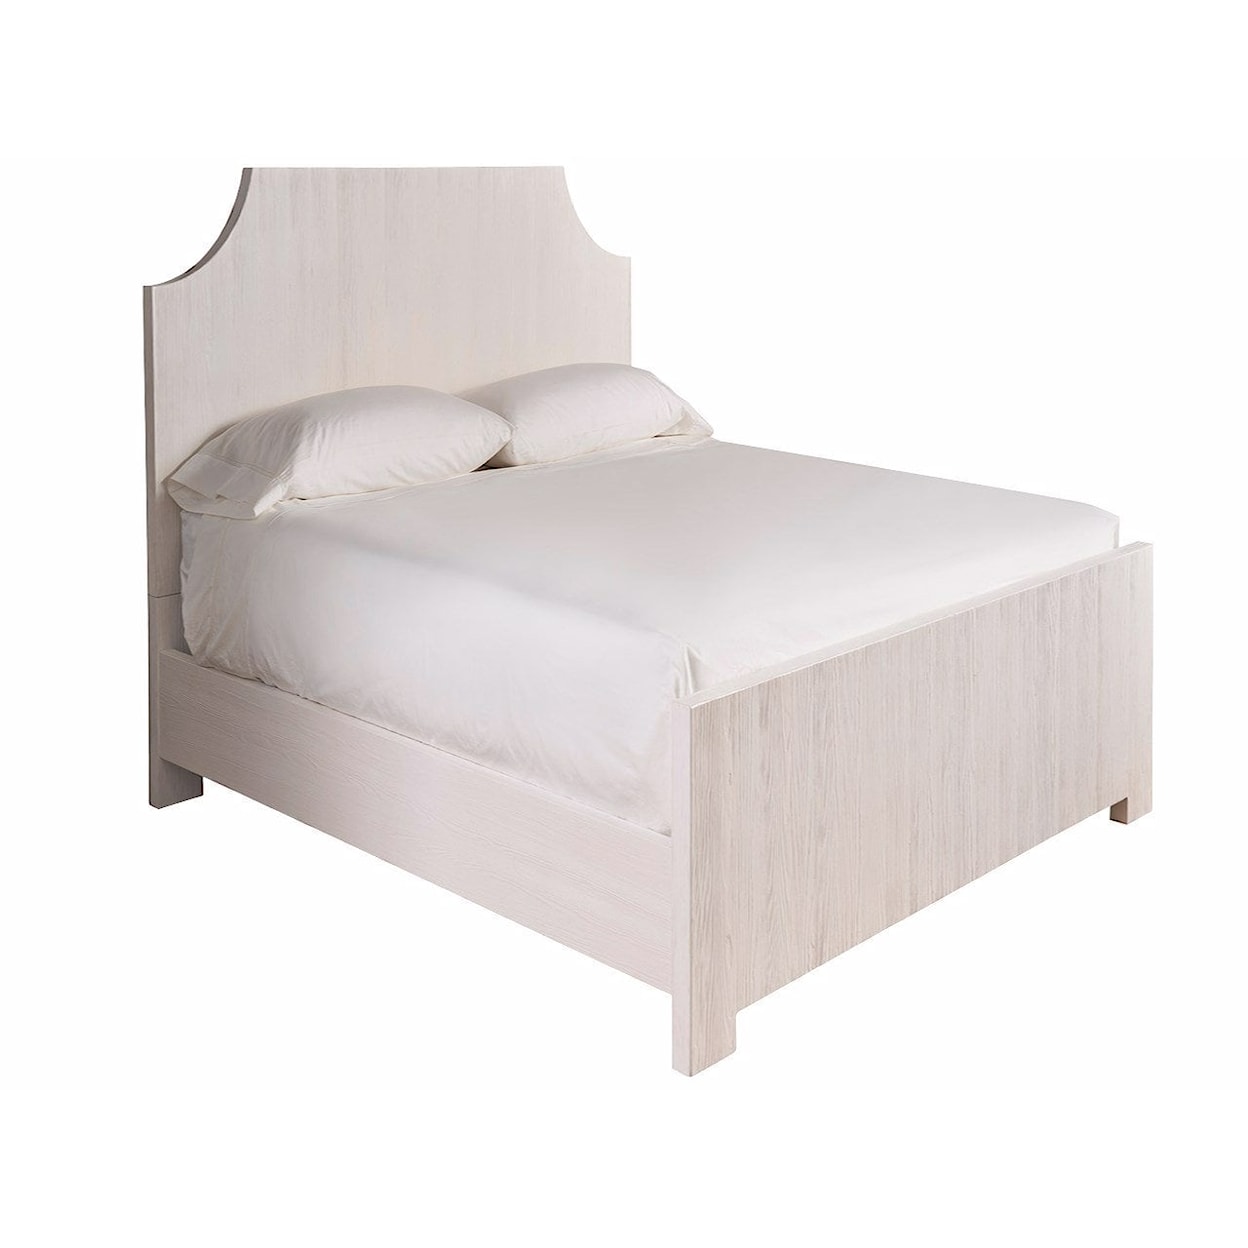 Universal Weekender Coastal Living Home Collection Queen Panel Bed